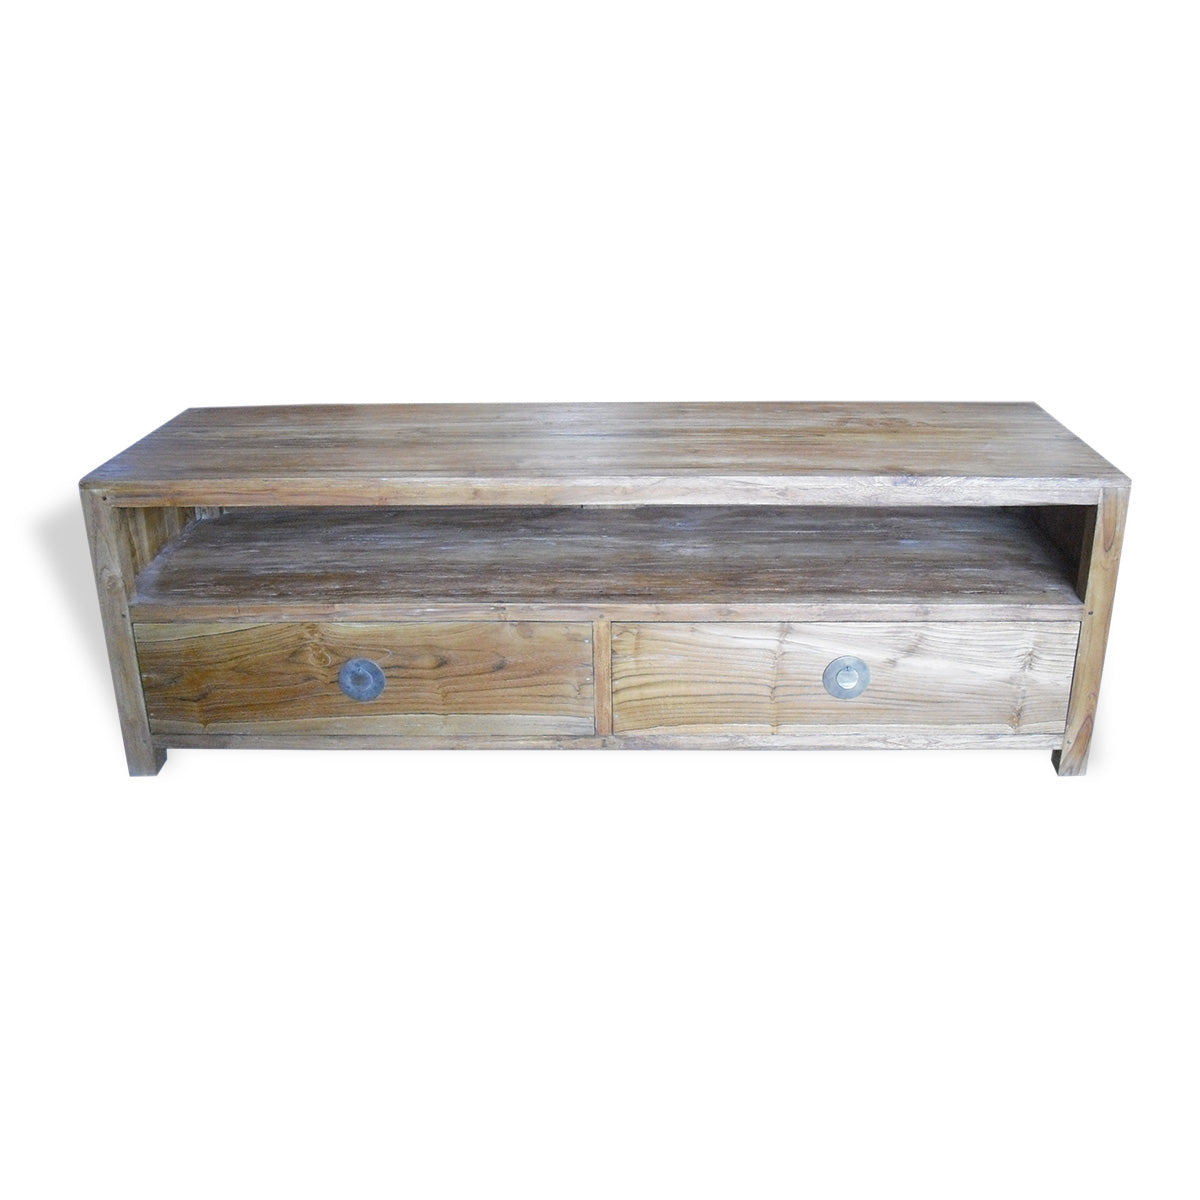 KYT-SPSD001 WAX ONLY RECYCLED TEAK WOOD TWO DRAWERS RUSTIC LOW ENTERTAINMENT UNIT